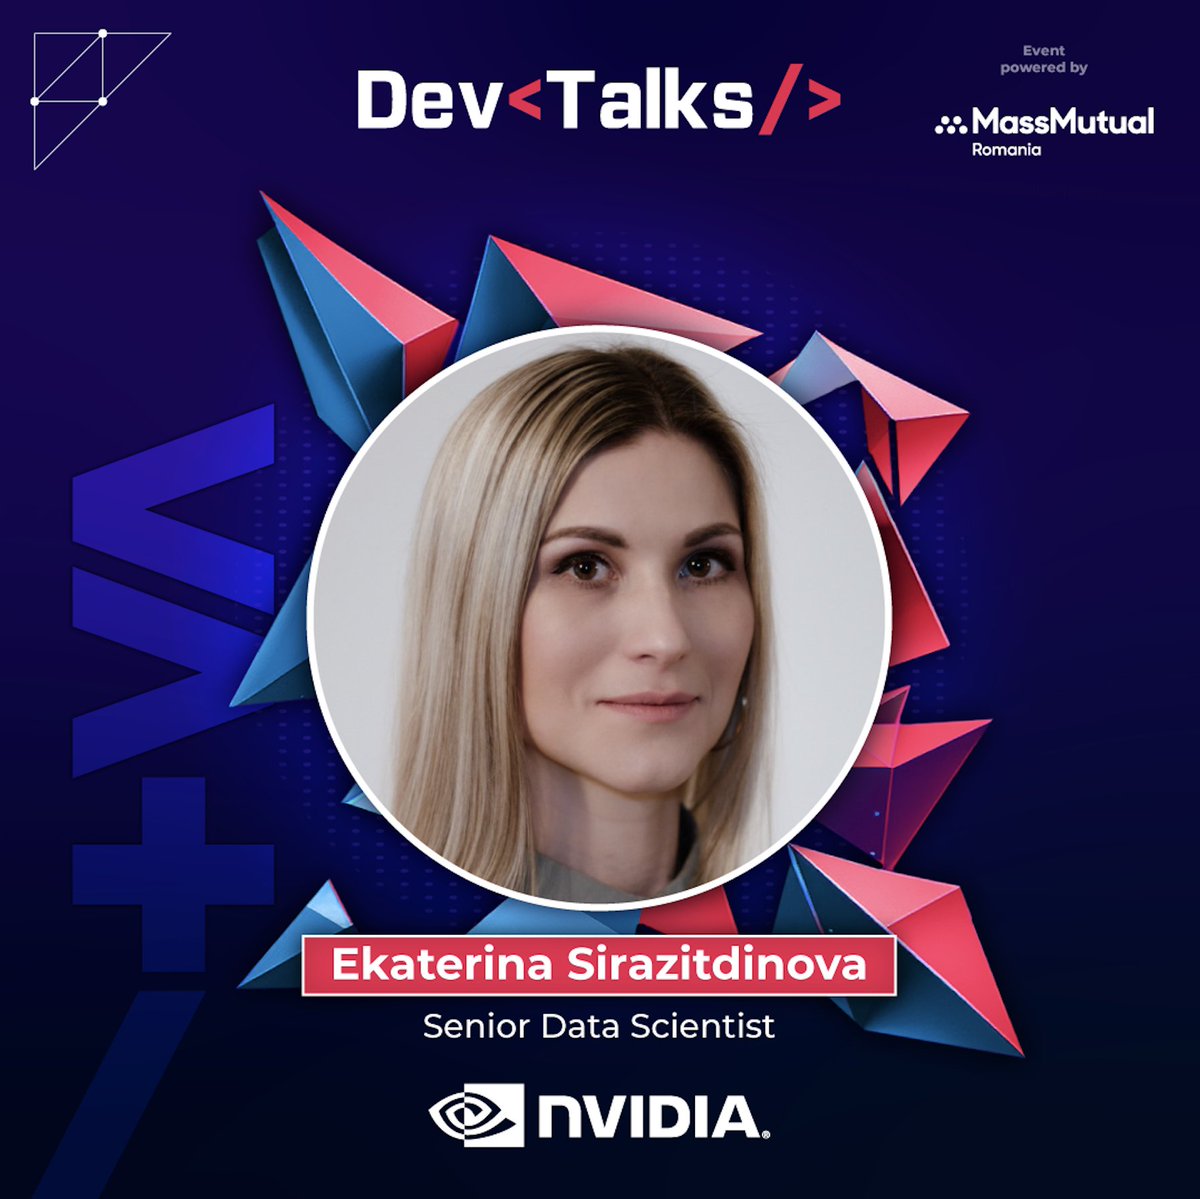 DevTalks is happening already tomorrow! I'm so excited and looking forward to meeting you in Bucharest, Romania.

devtalks.ro